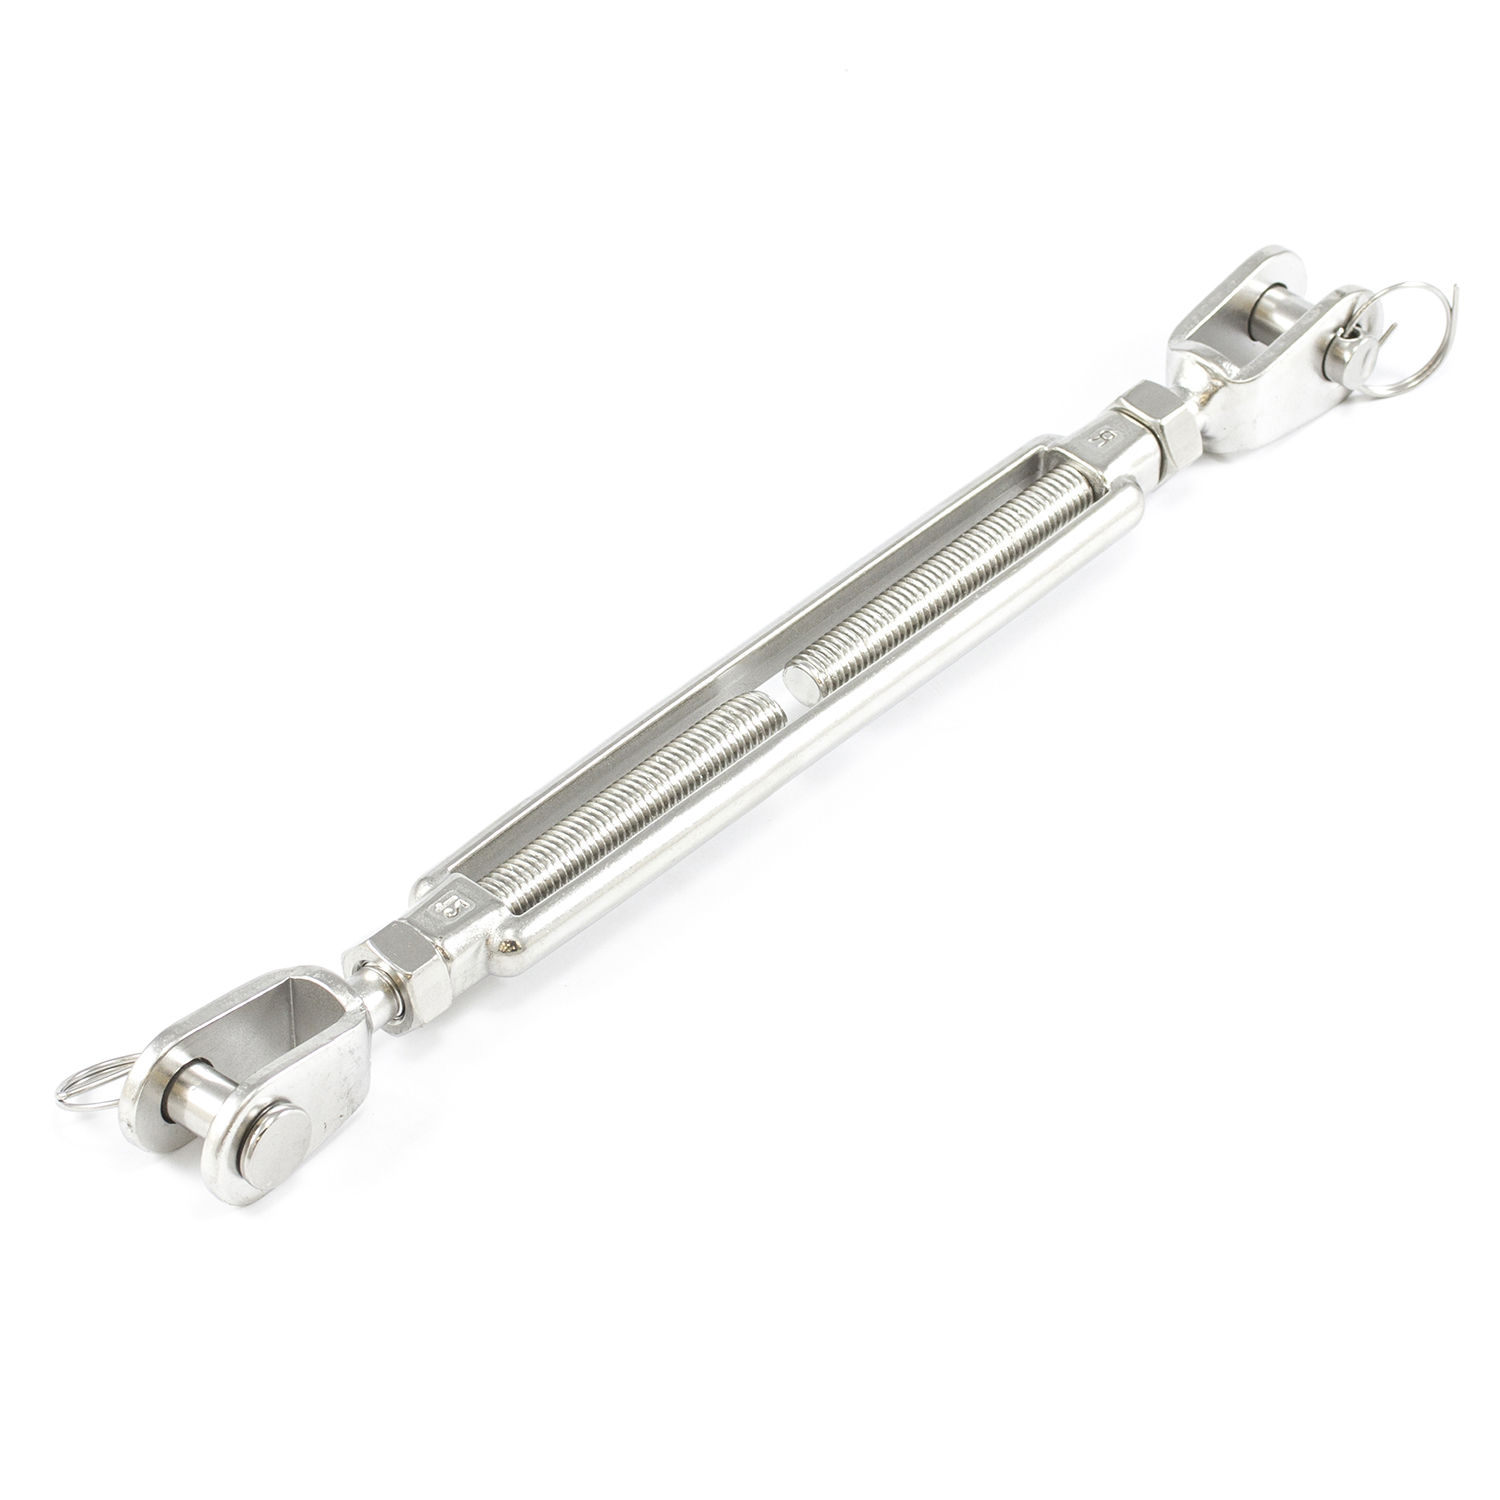 SolaMesh Turnbuckle Jaw/Jaw Stainless Steel Type 316 12mm (7/16")